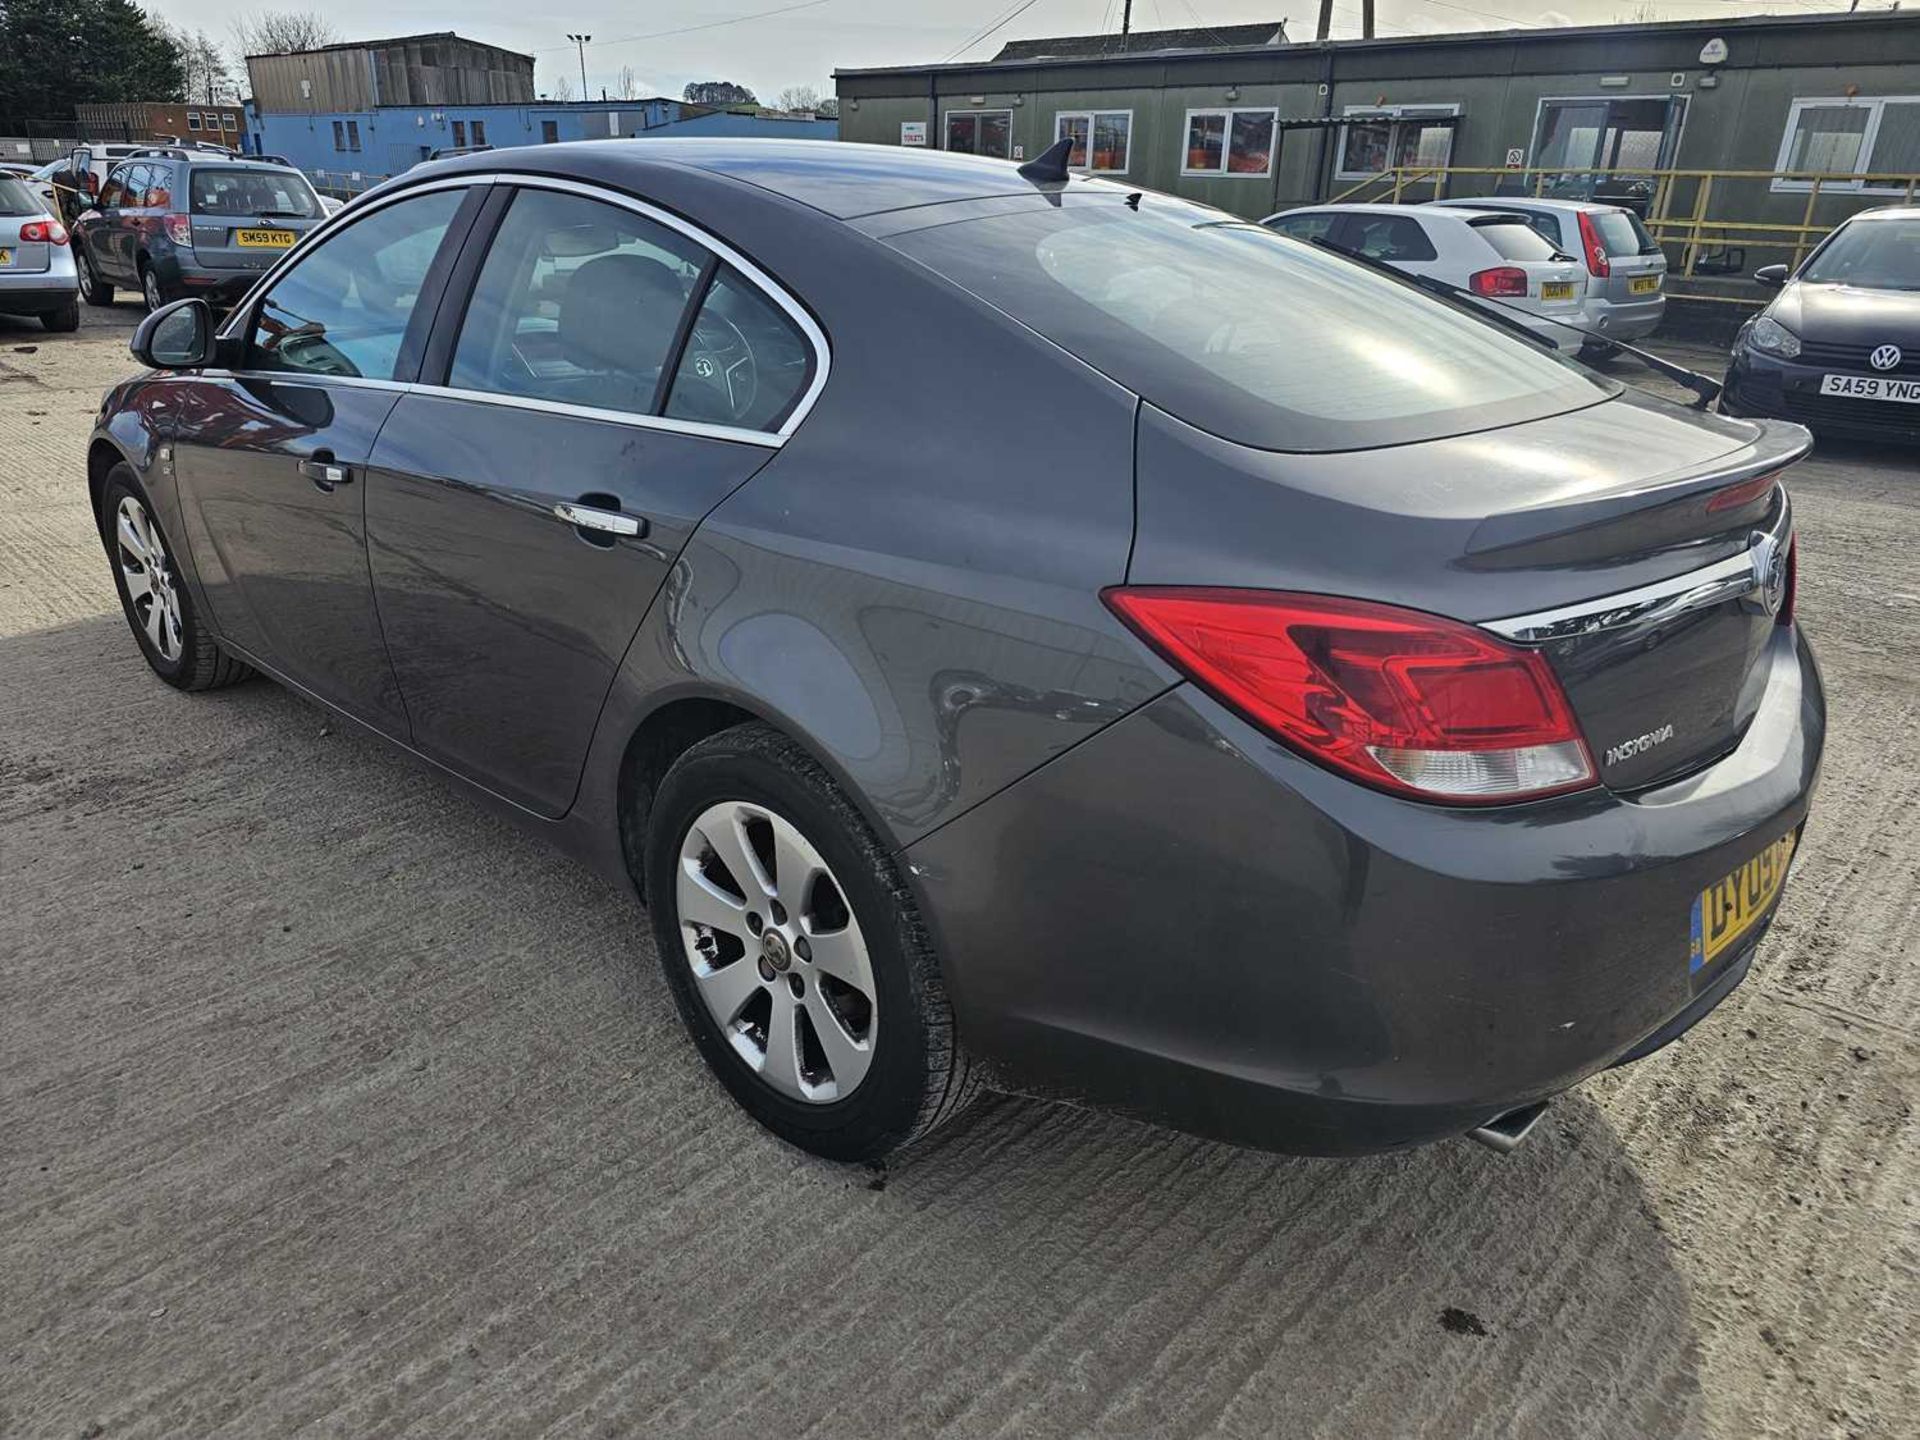 2009 Vauxhall Insignia, 6 Speed, Bluetooth, Cruise Control, Climate Control (Reg. Docs. Available, T - Image 3 of 28